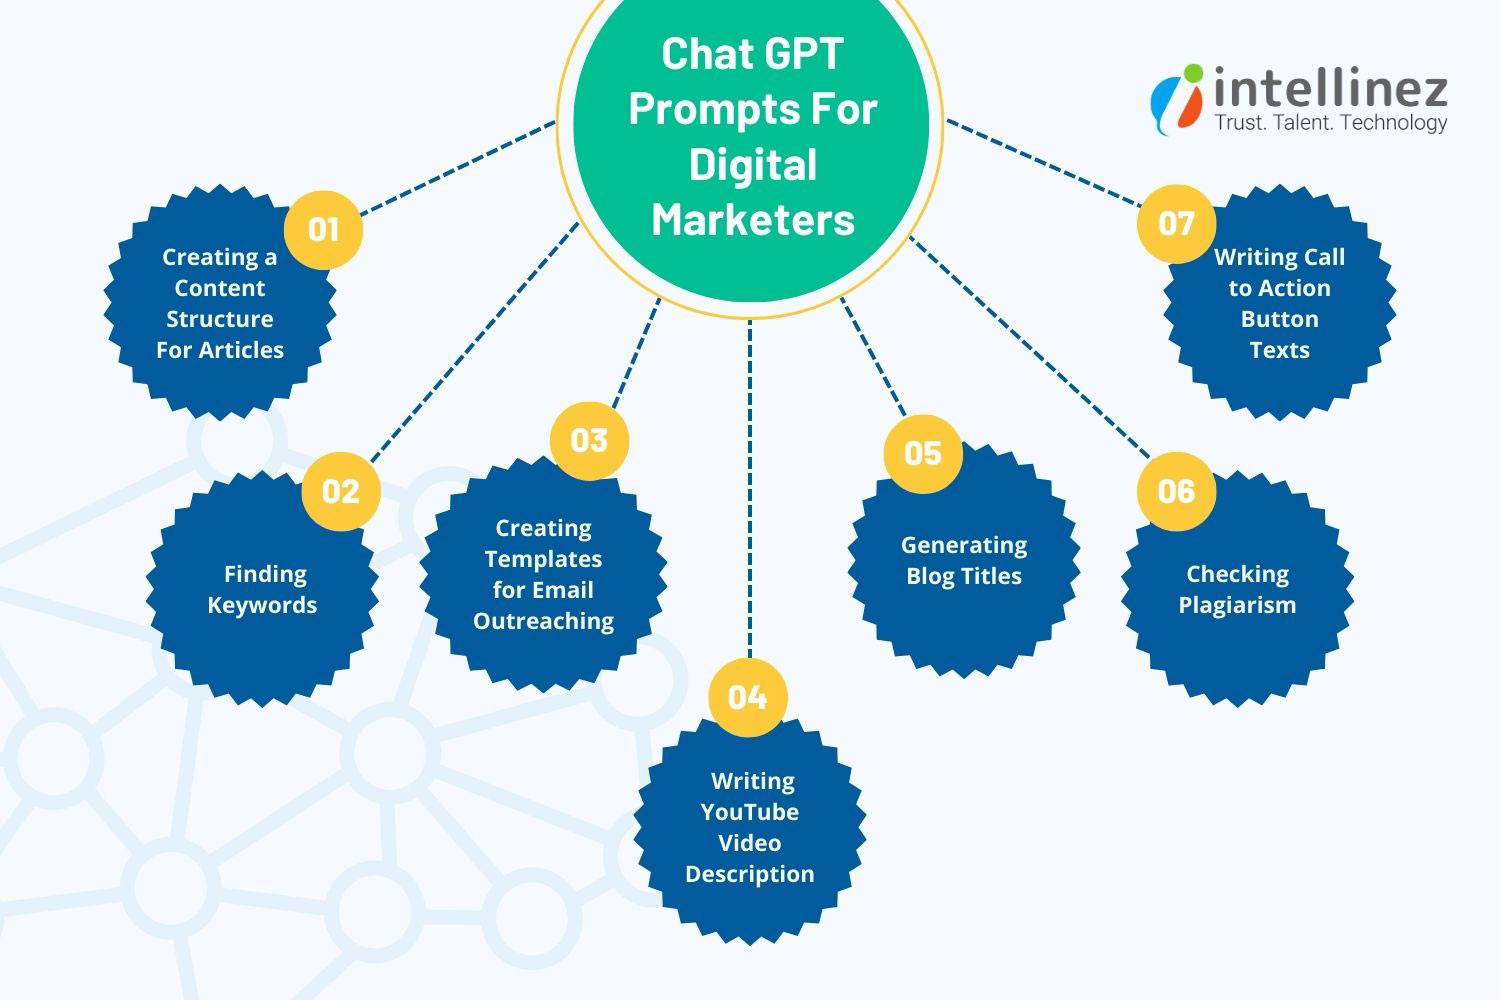 ChatGPT Prompts for Digital Marketers